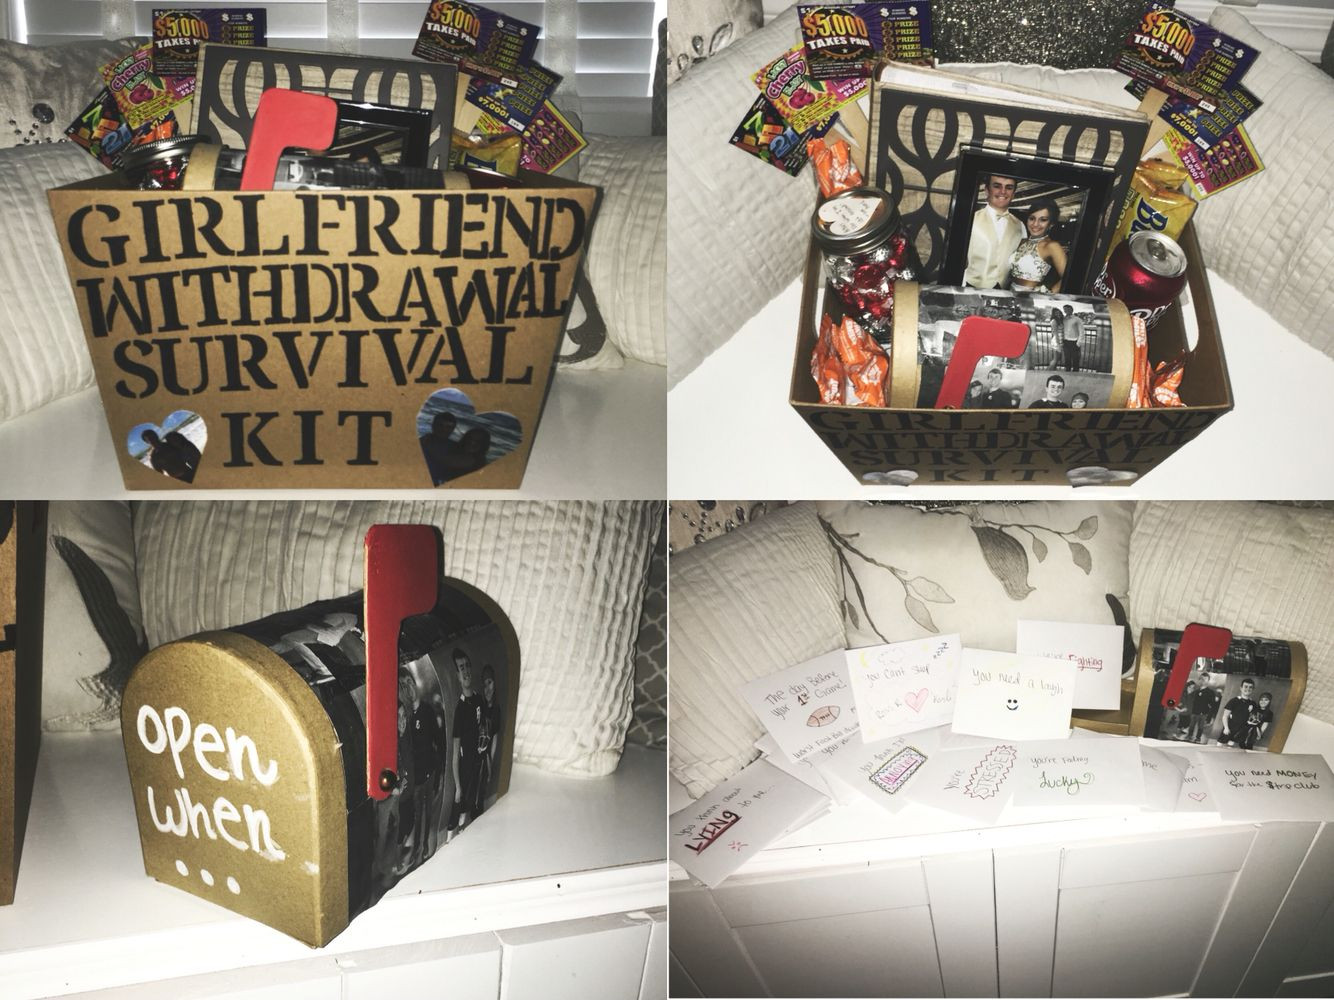 College Boyfriend Gift Ideas
 Girlfriend withdrawal survival kit and open when letters